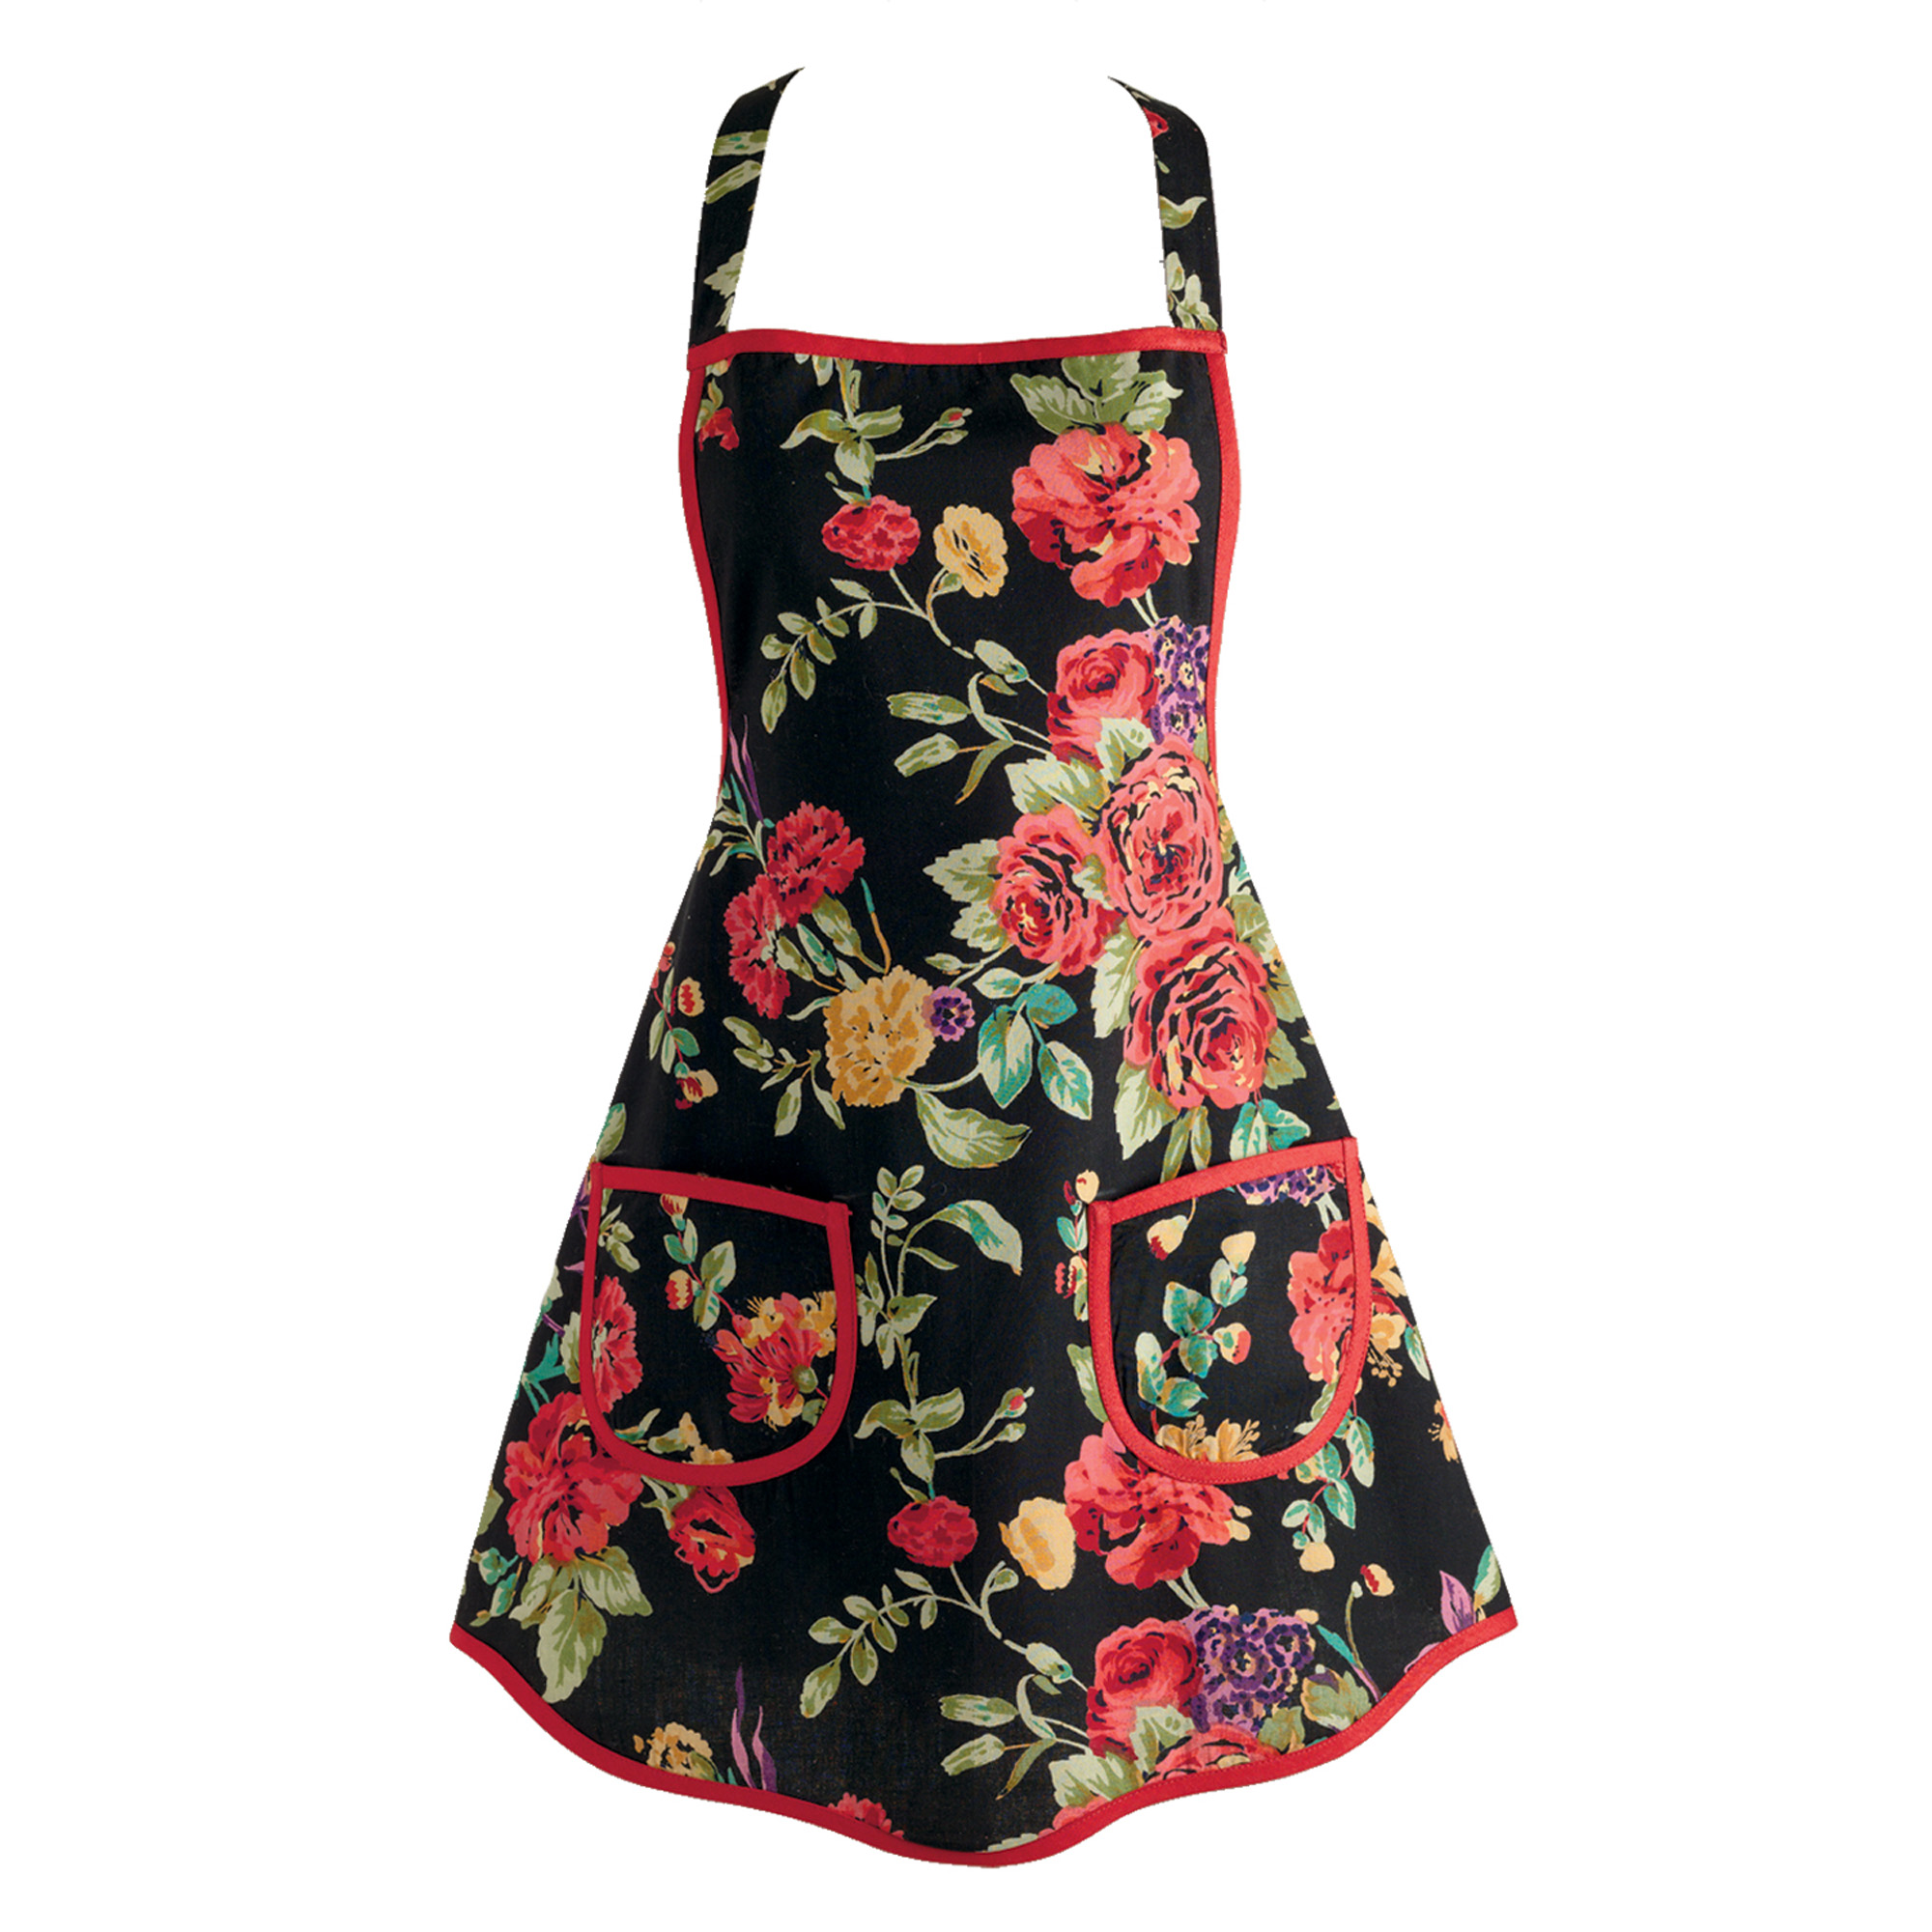 Contemporary Home Living Vintage Style Black and Red Wild Rose Floral Kitchen Apron with Pockets 30"